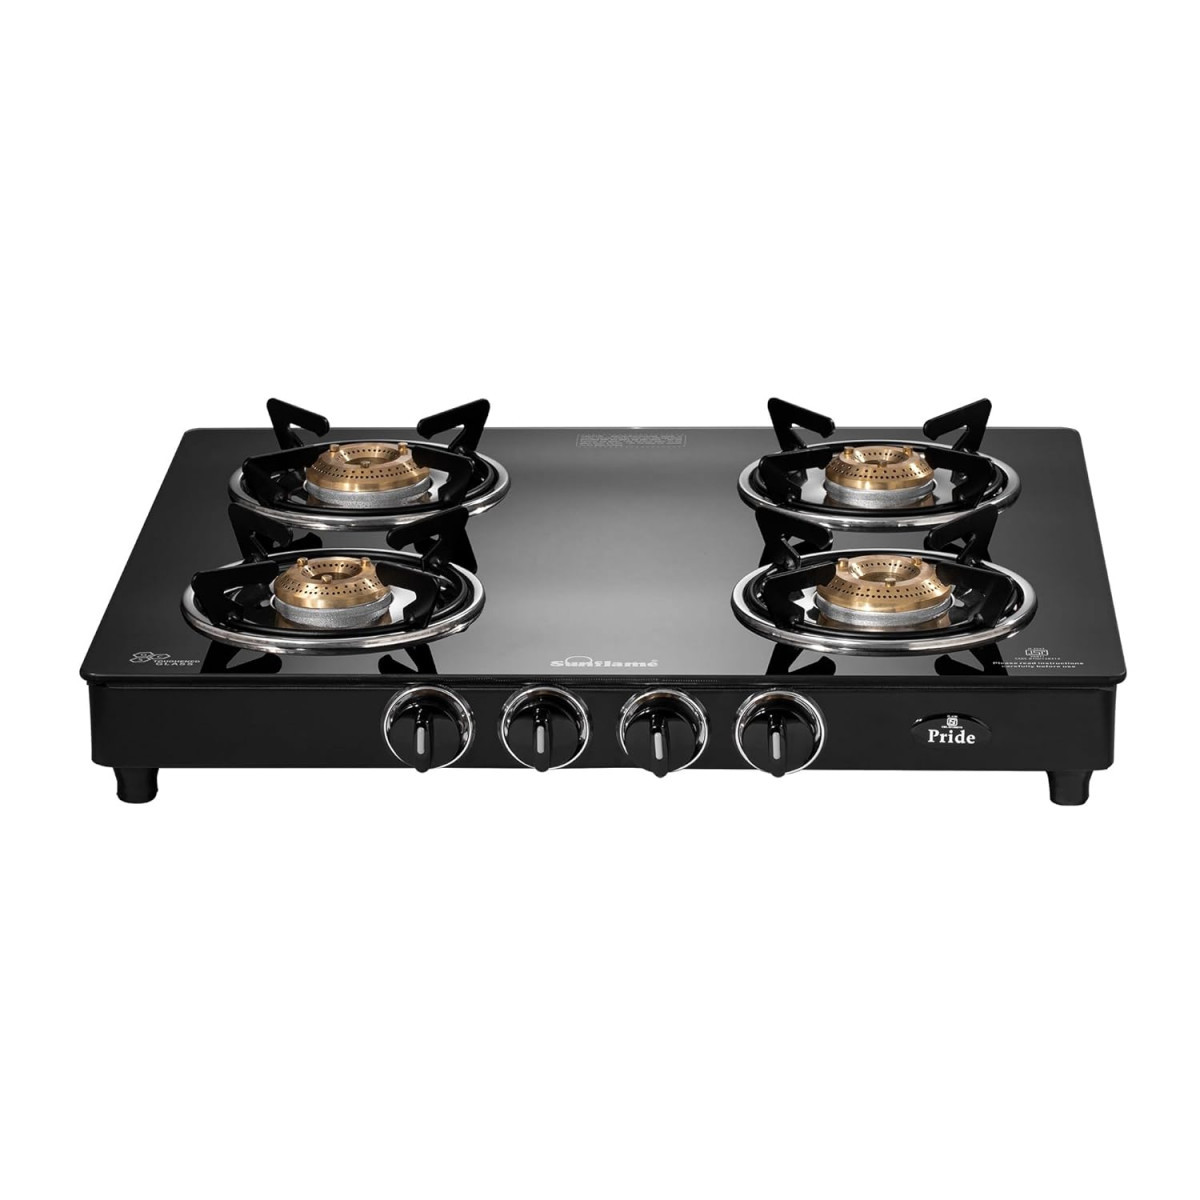 Sunflame Pride 4 Burner Gas Stove  2-Years Product Coverage  2 Medium and 2 Small Brass Burners  Ergonomic Knobs  Easy to Maintain  Toughened Glass Top  PAN India Presence  Black